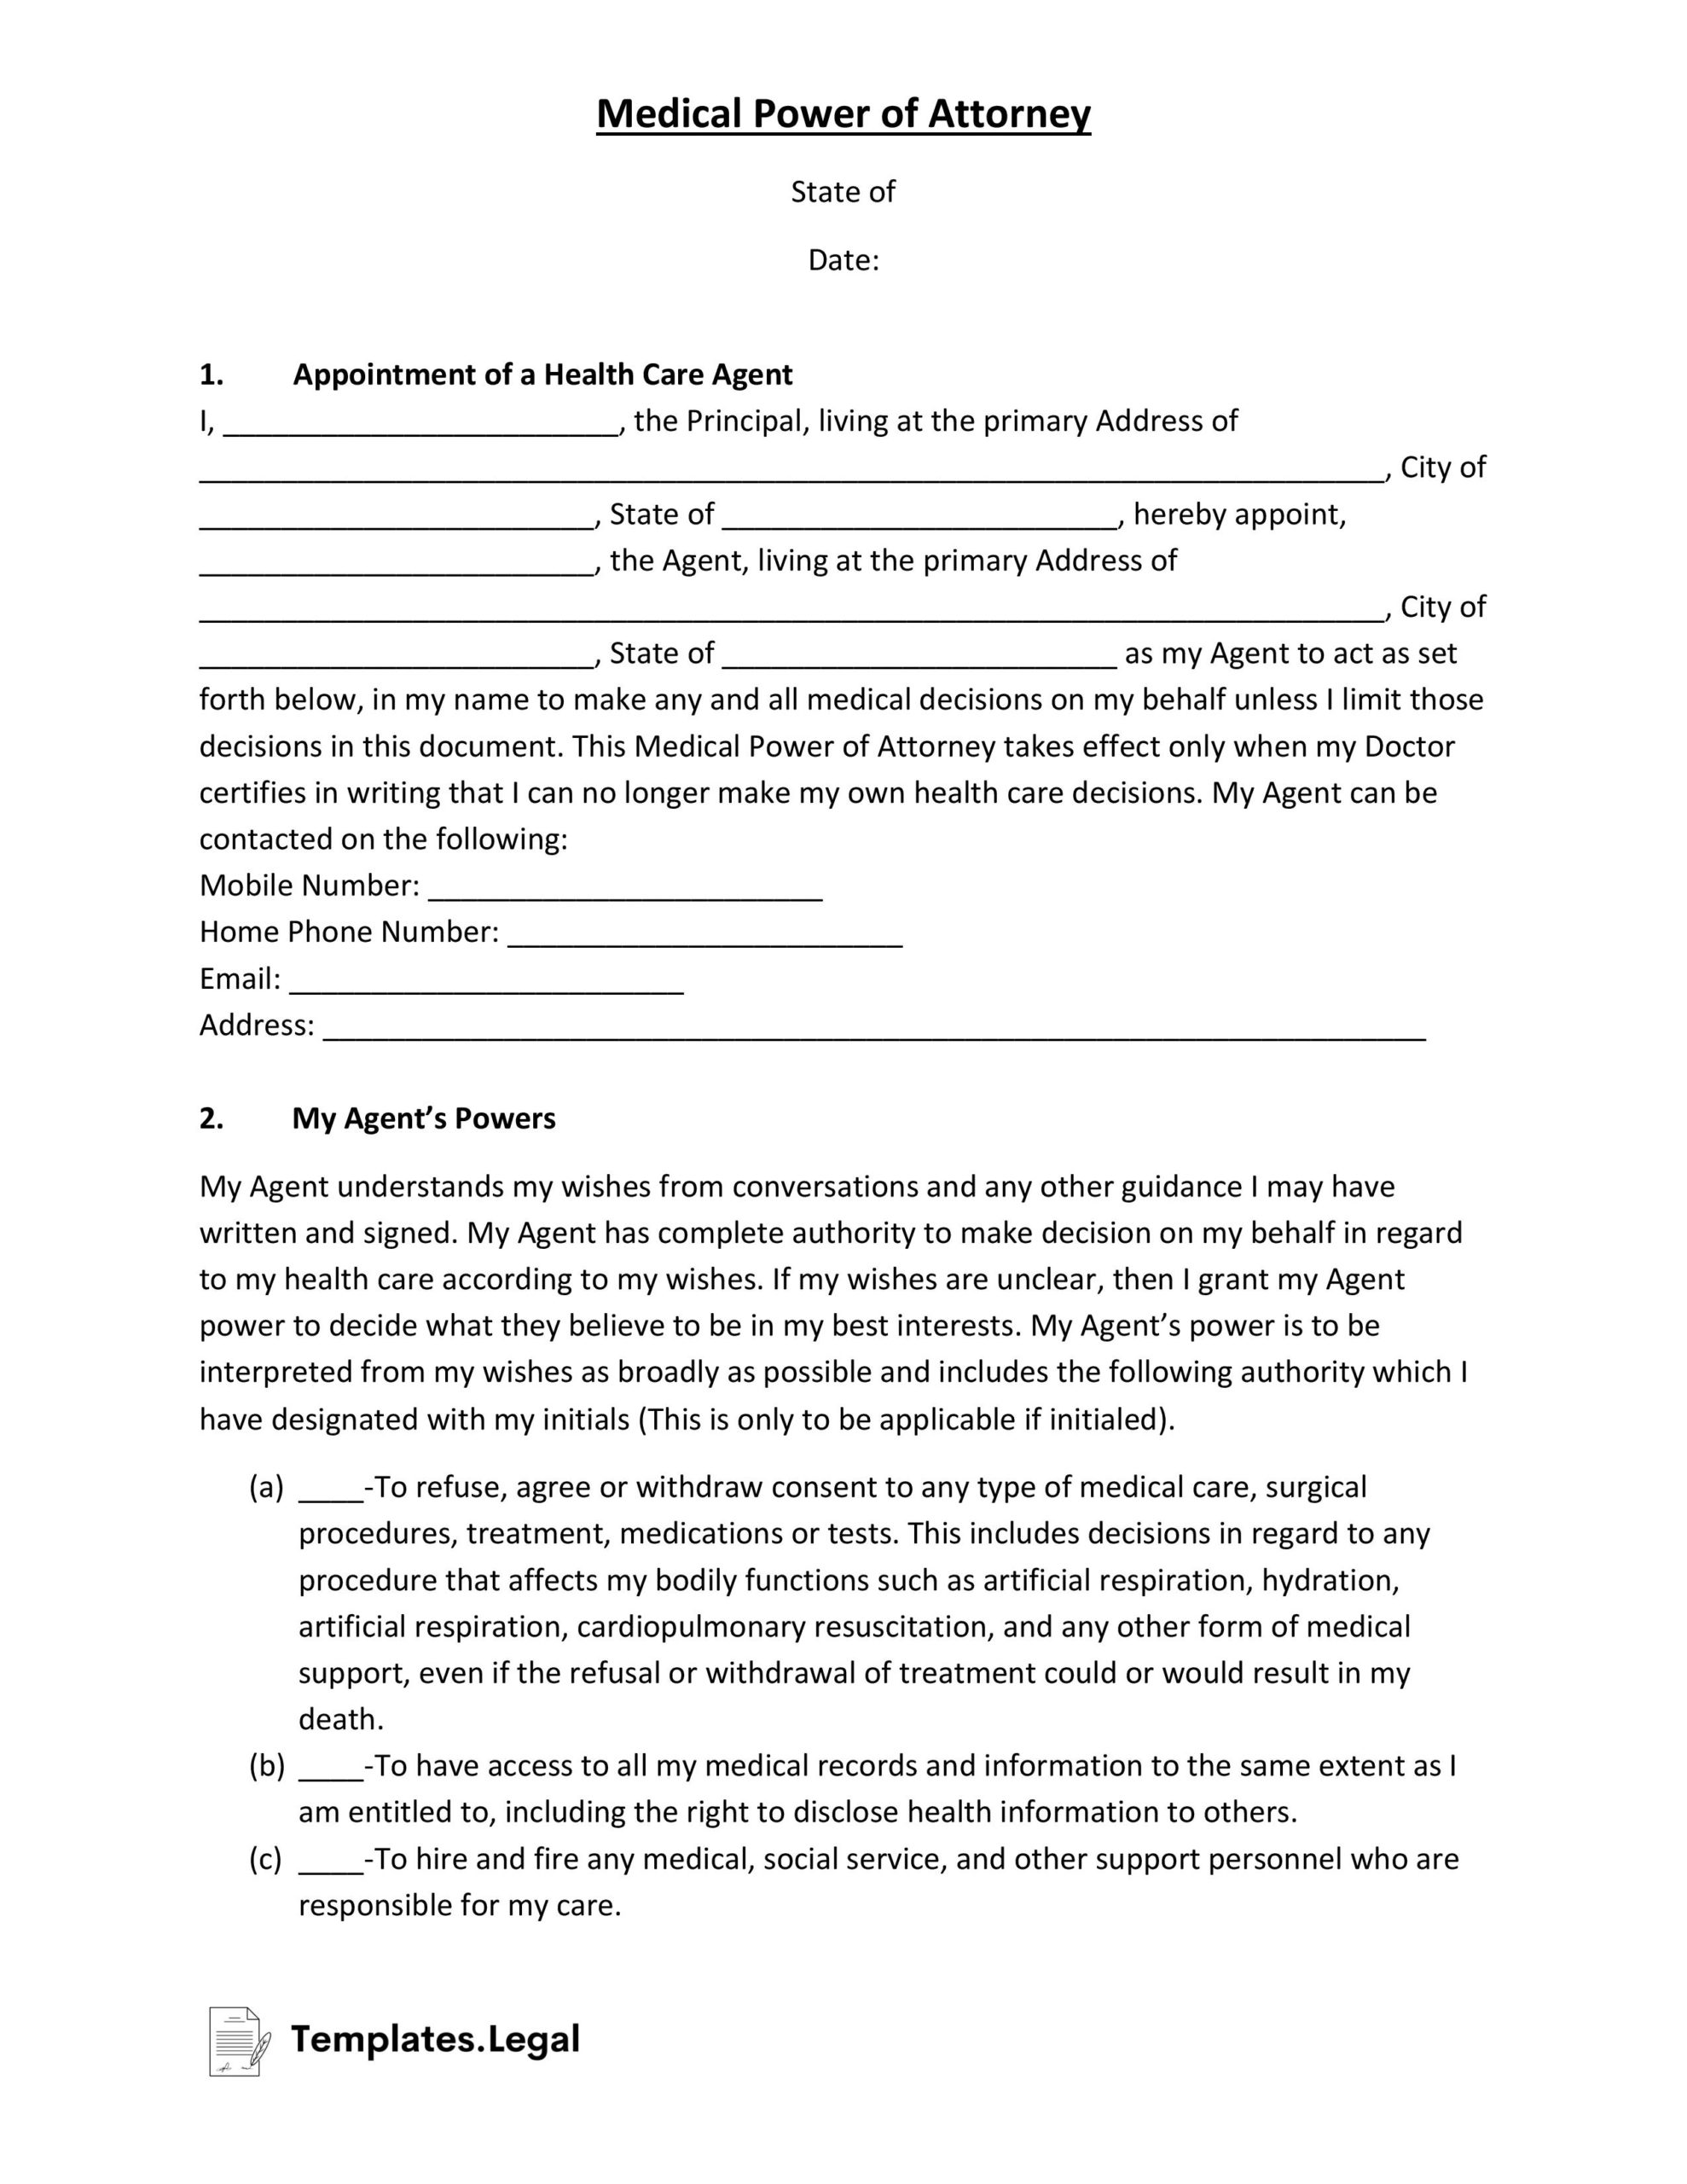 Medical Power Of Attorney Templates Free Word PDF ODT 